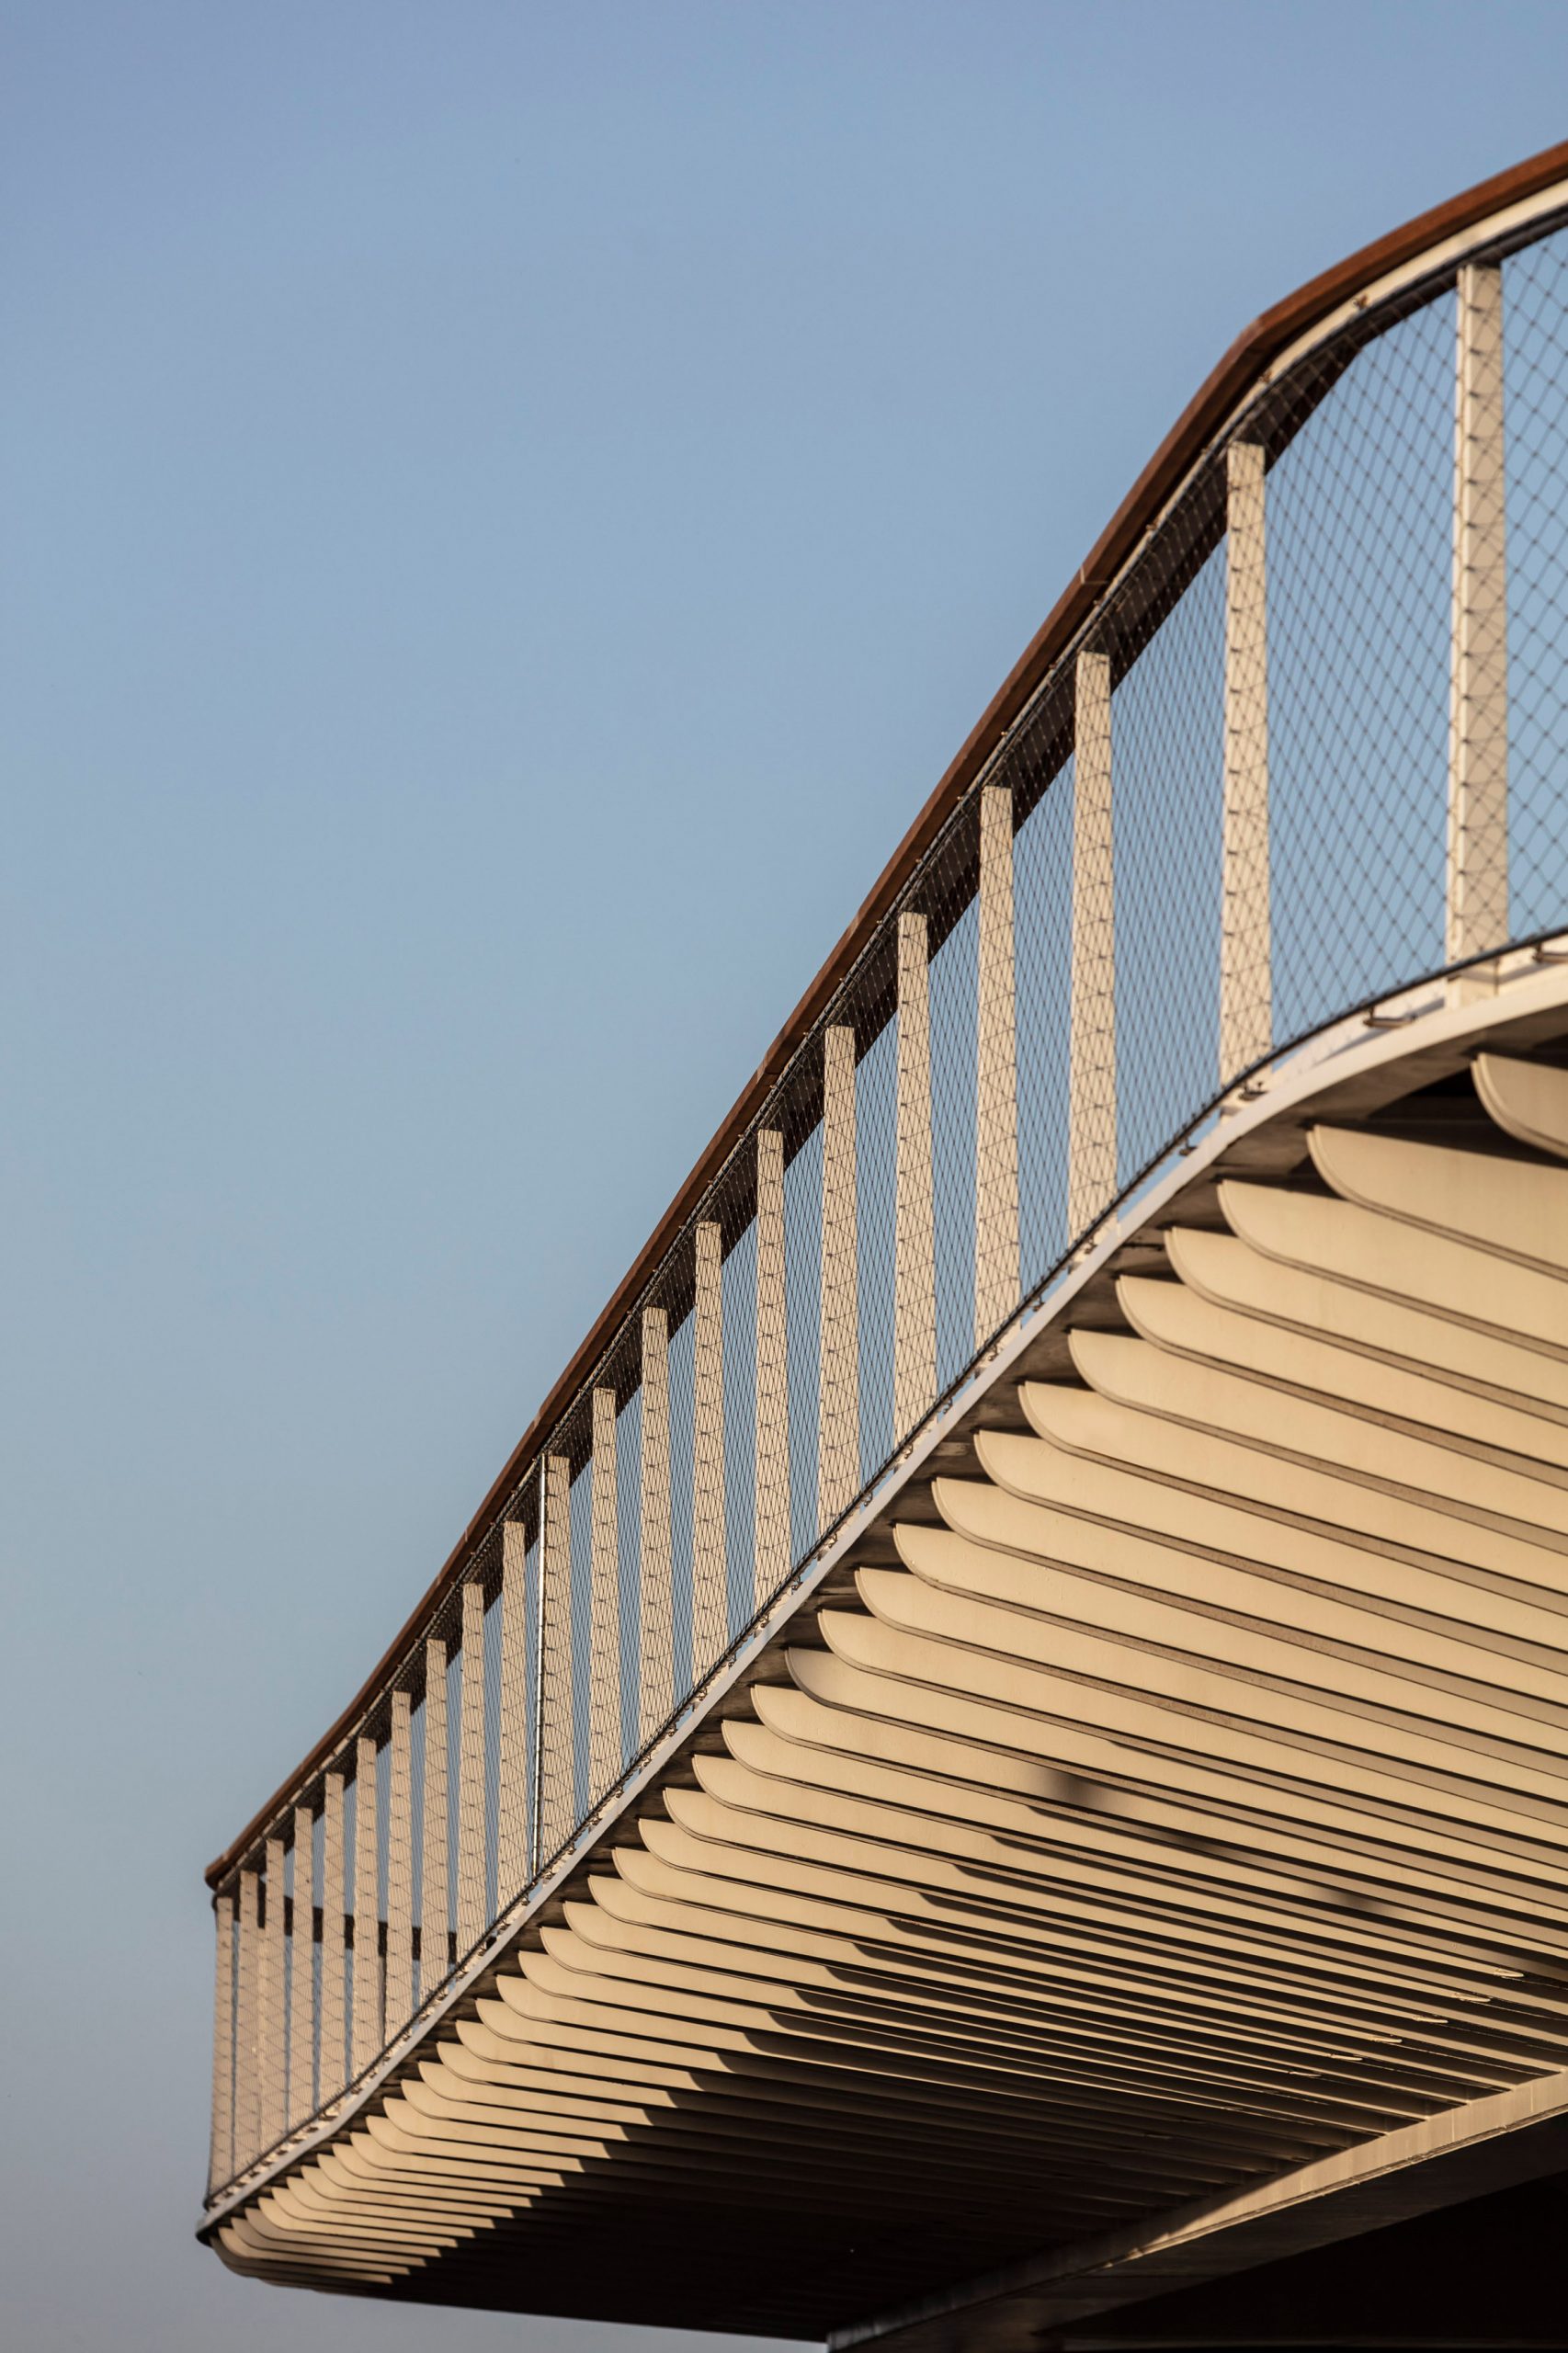 Detailed view of the Technion Entrance Gate bridge standing underneath